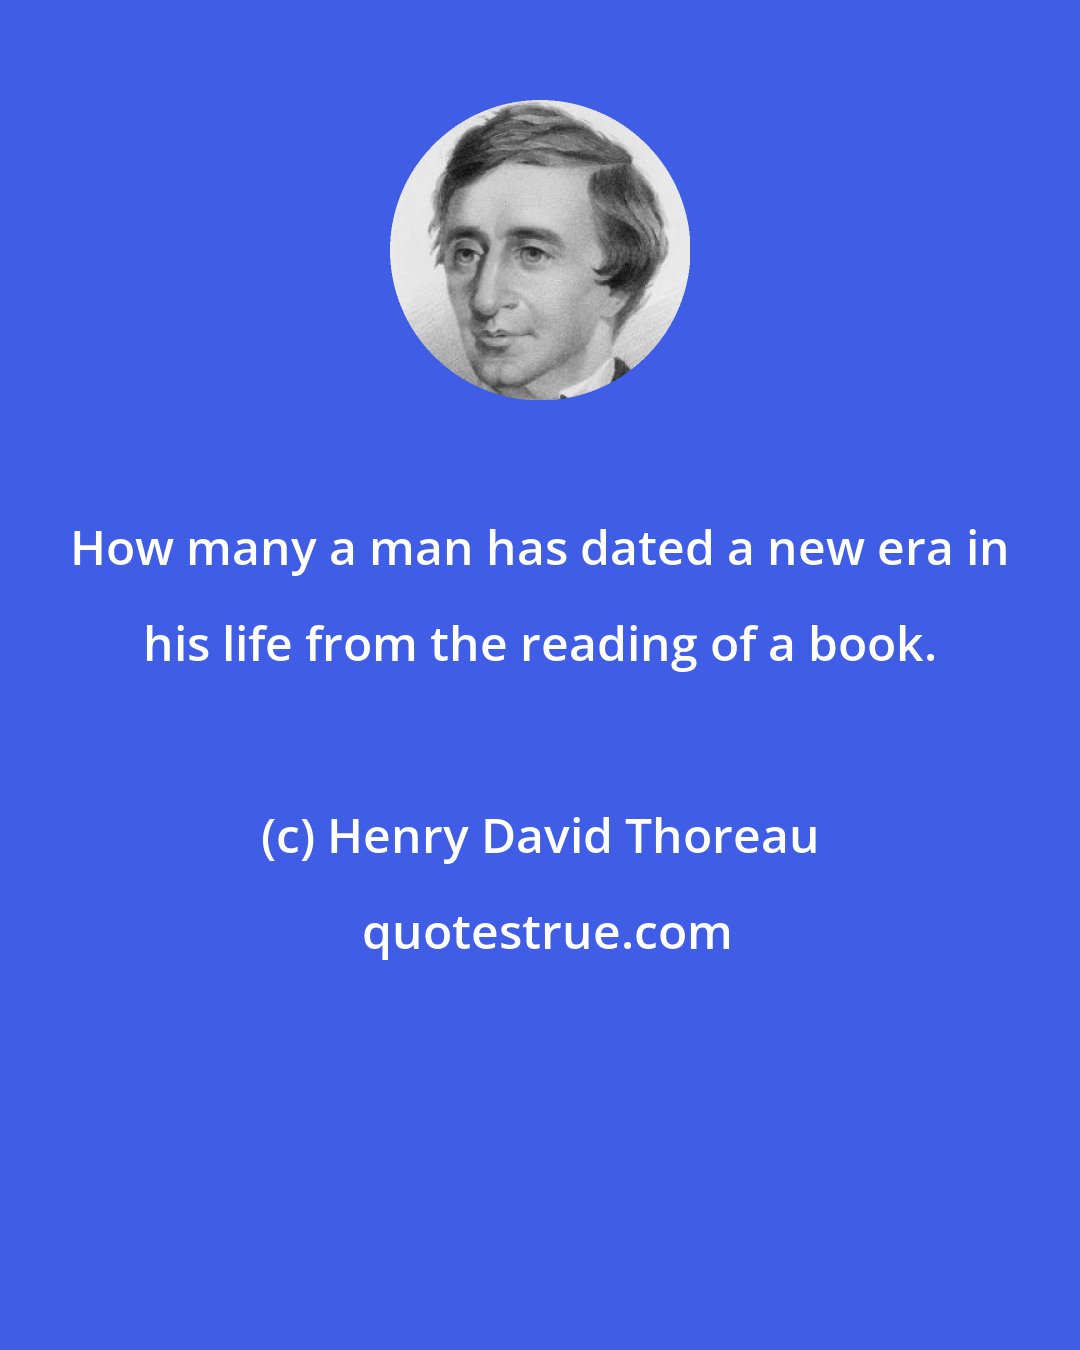 Henry David Thoreau: How many a man has dated a new era in his life from the reading of a book.